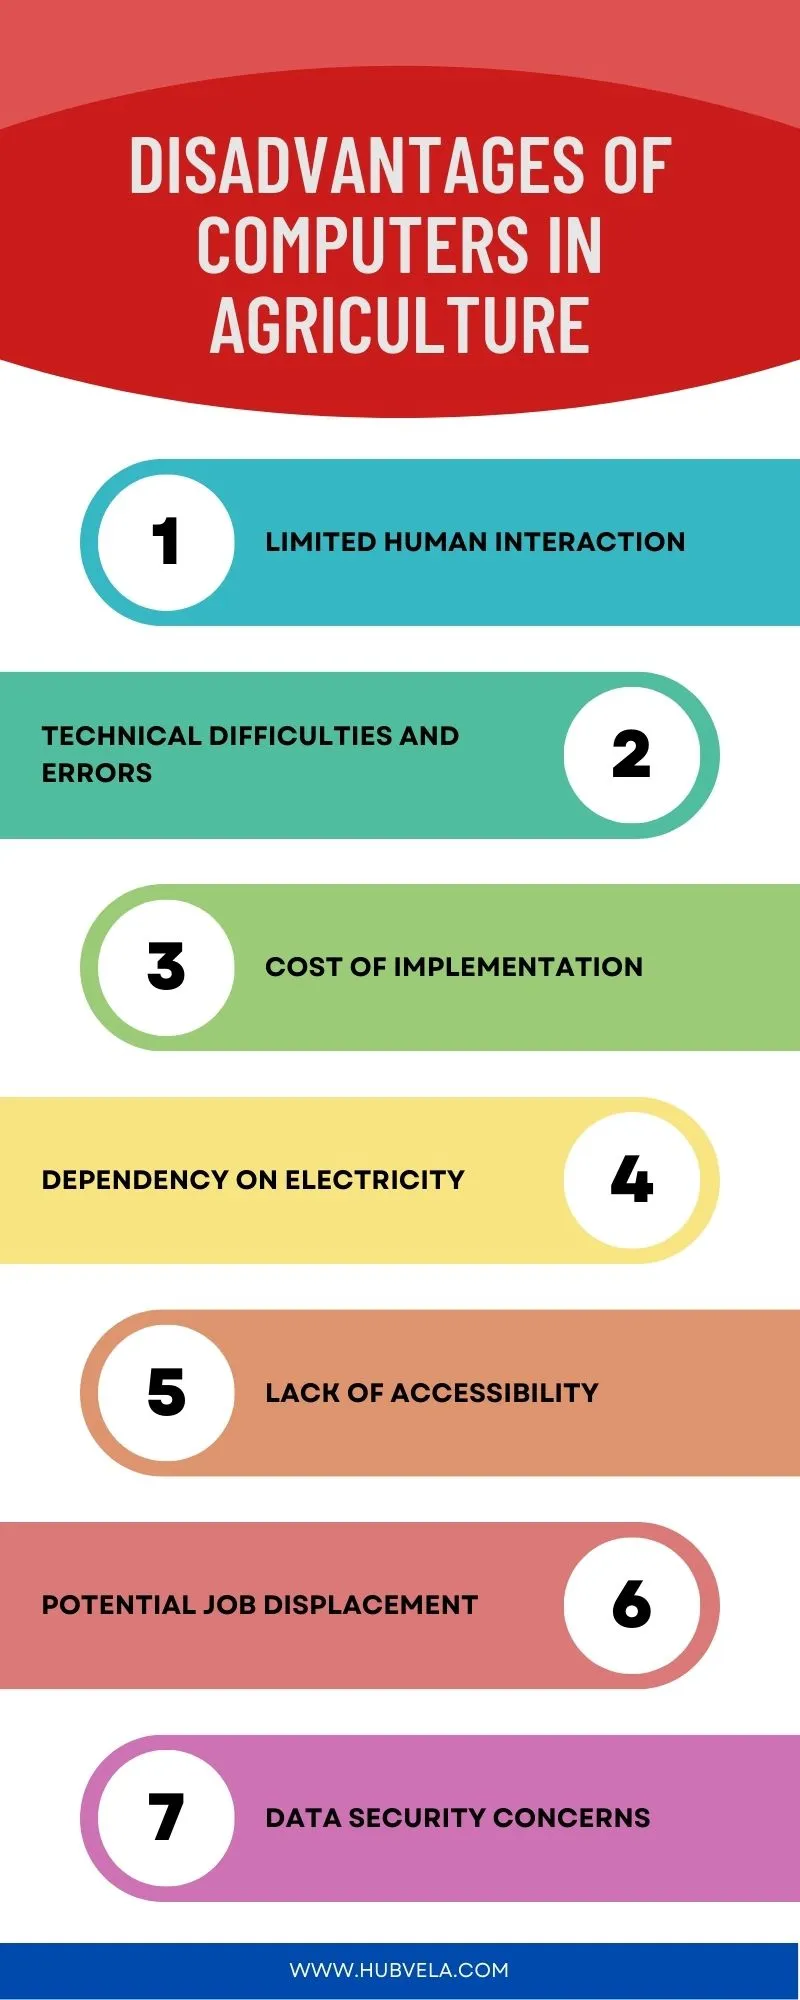 Disadvantages of Computers in Agriculture Infographic